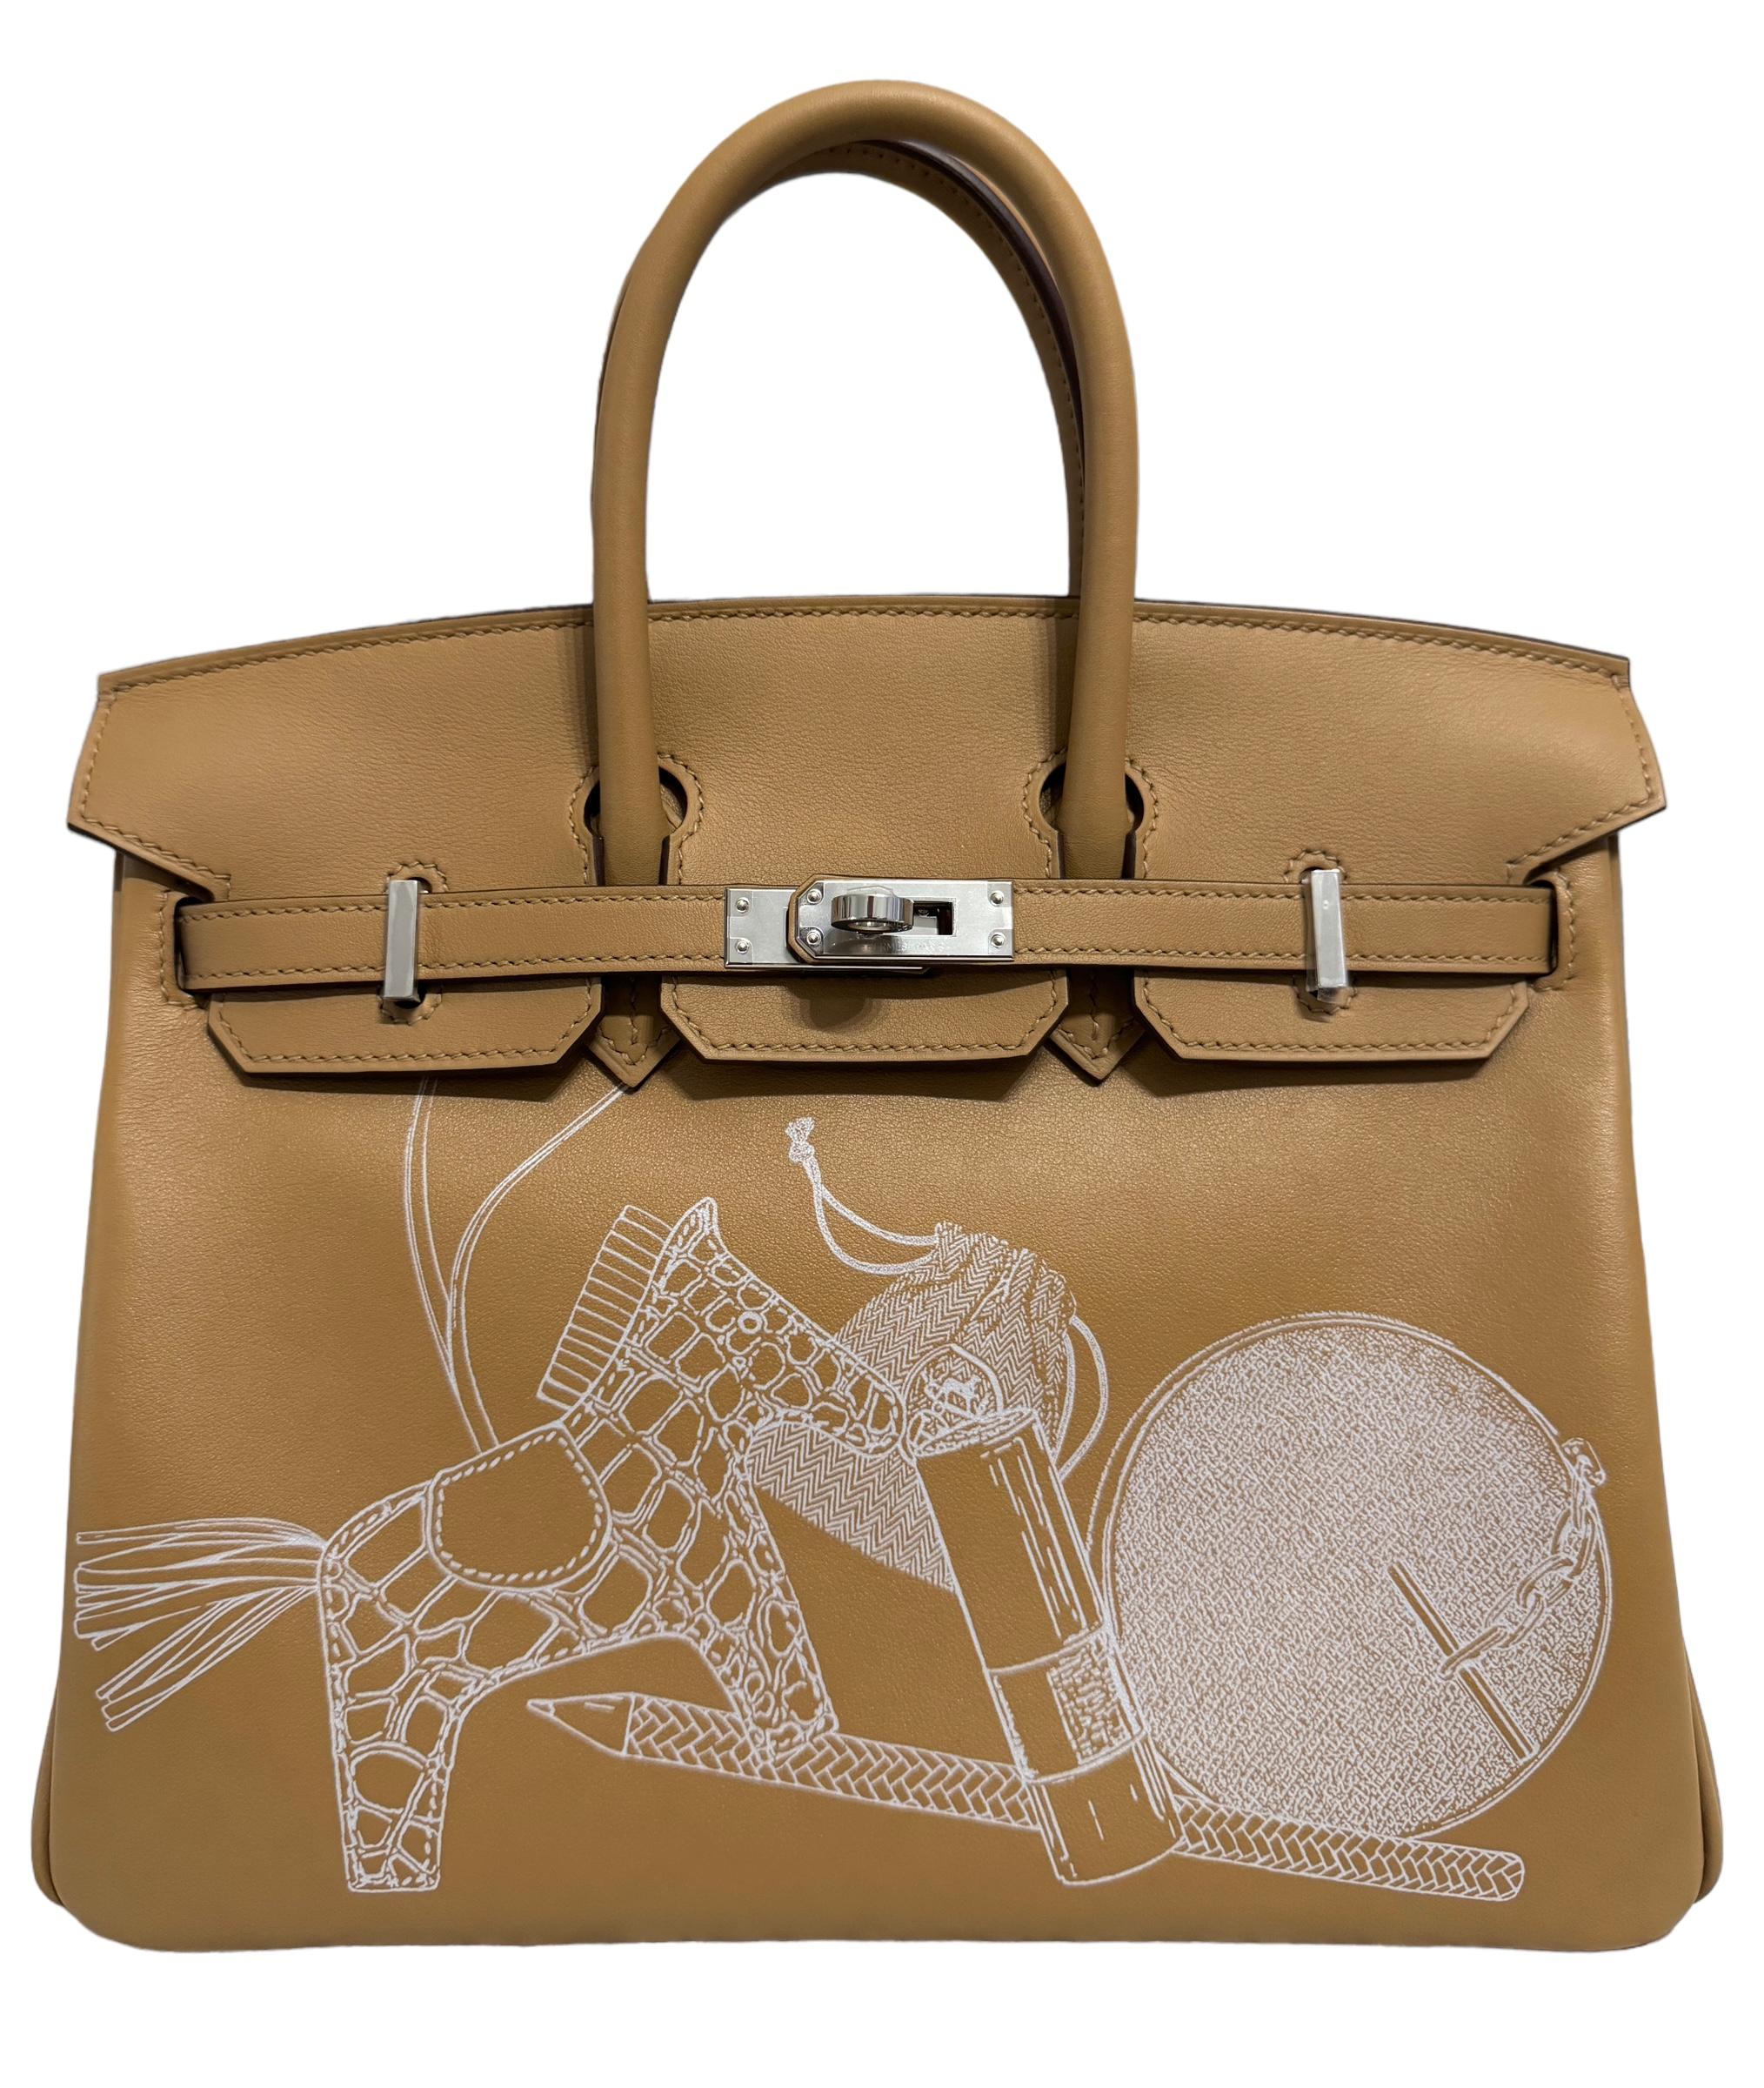 Absolutely Stunning LIMITED EDITION and One The Most Coveted and Difficult to get Hermes Combos! New 2023 Hermes Birkin 25 In and Out Biscuit Leather complimented by Palladium Hardware. New B Stamp 2023. Includes all accessories and Limited Edition